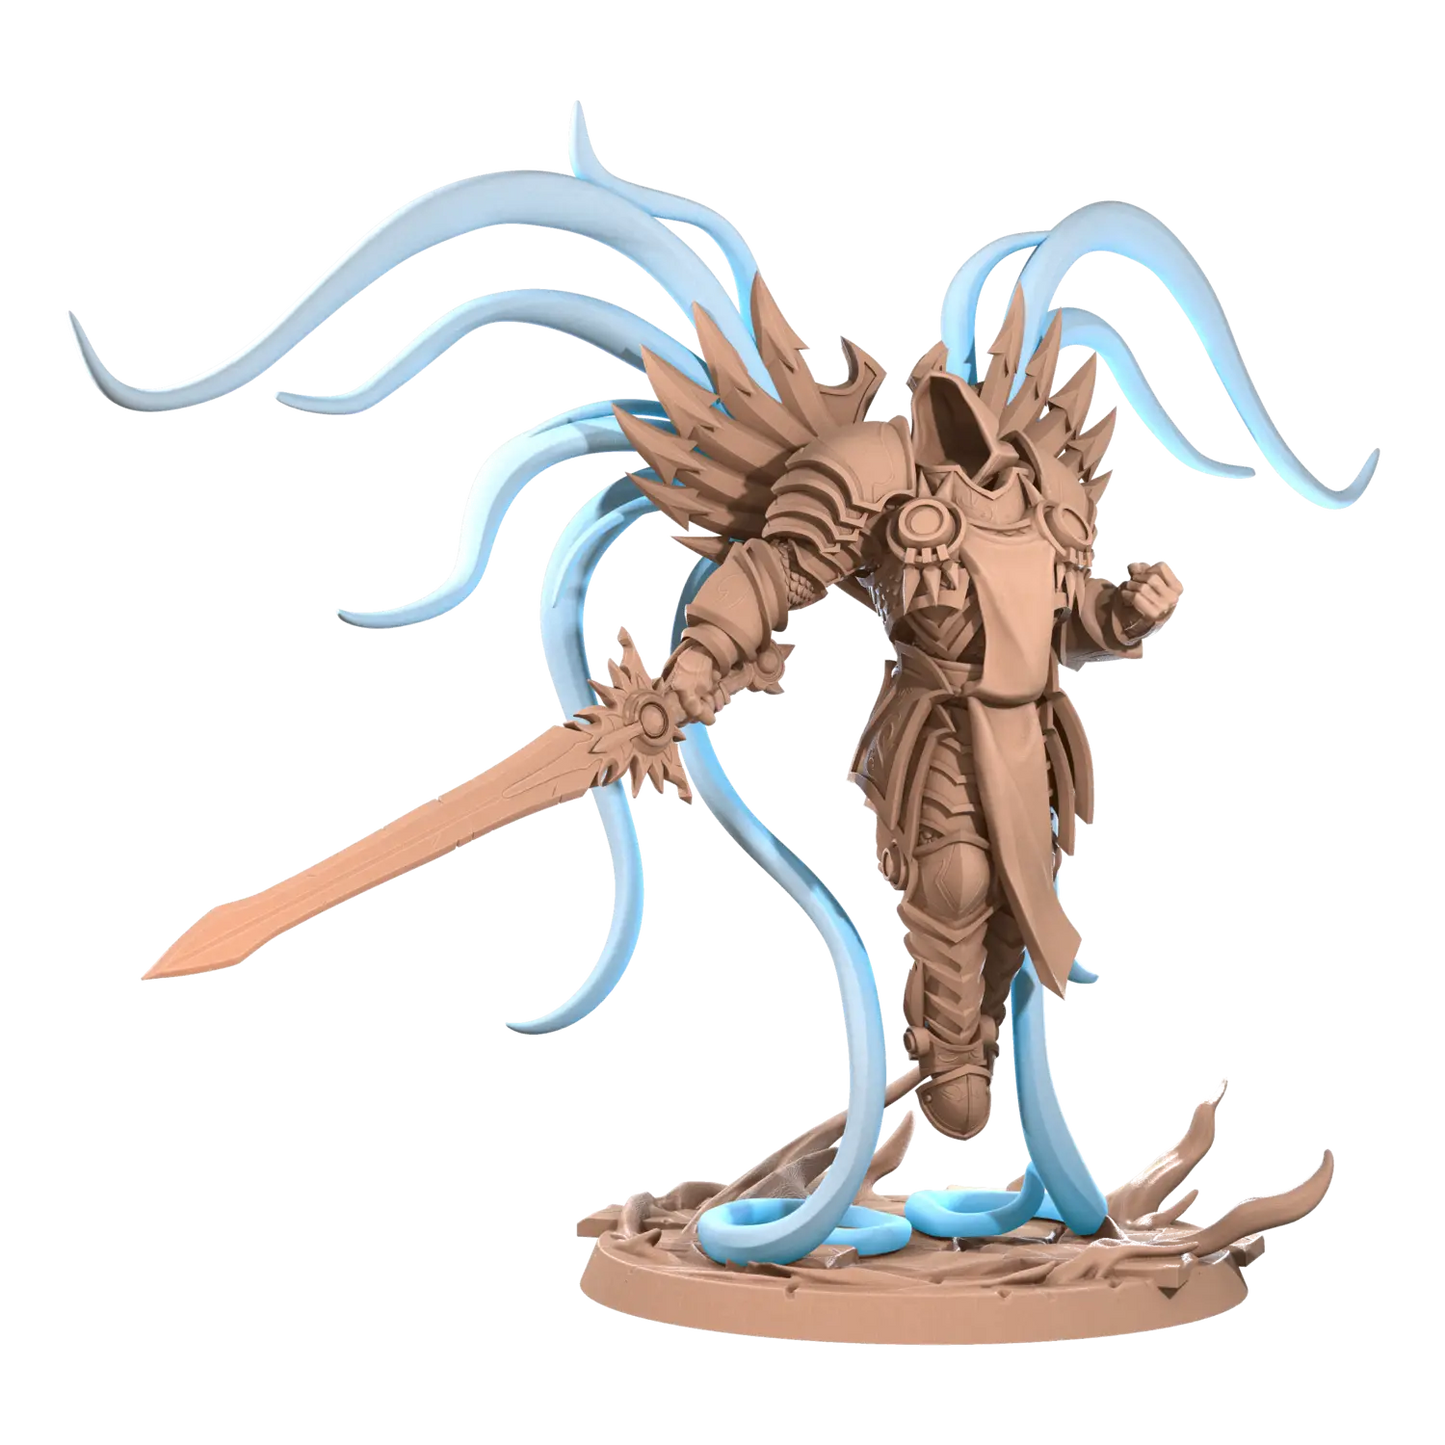 DnD Angel - Fighter - Miniature - Paladin - Serapfims Raphael, Seraphim of Justice  Angel - Fighter - Miniature - Paladin - Serapfims sold by DoubleHitShop